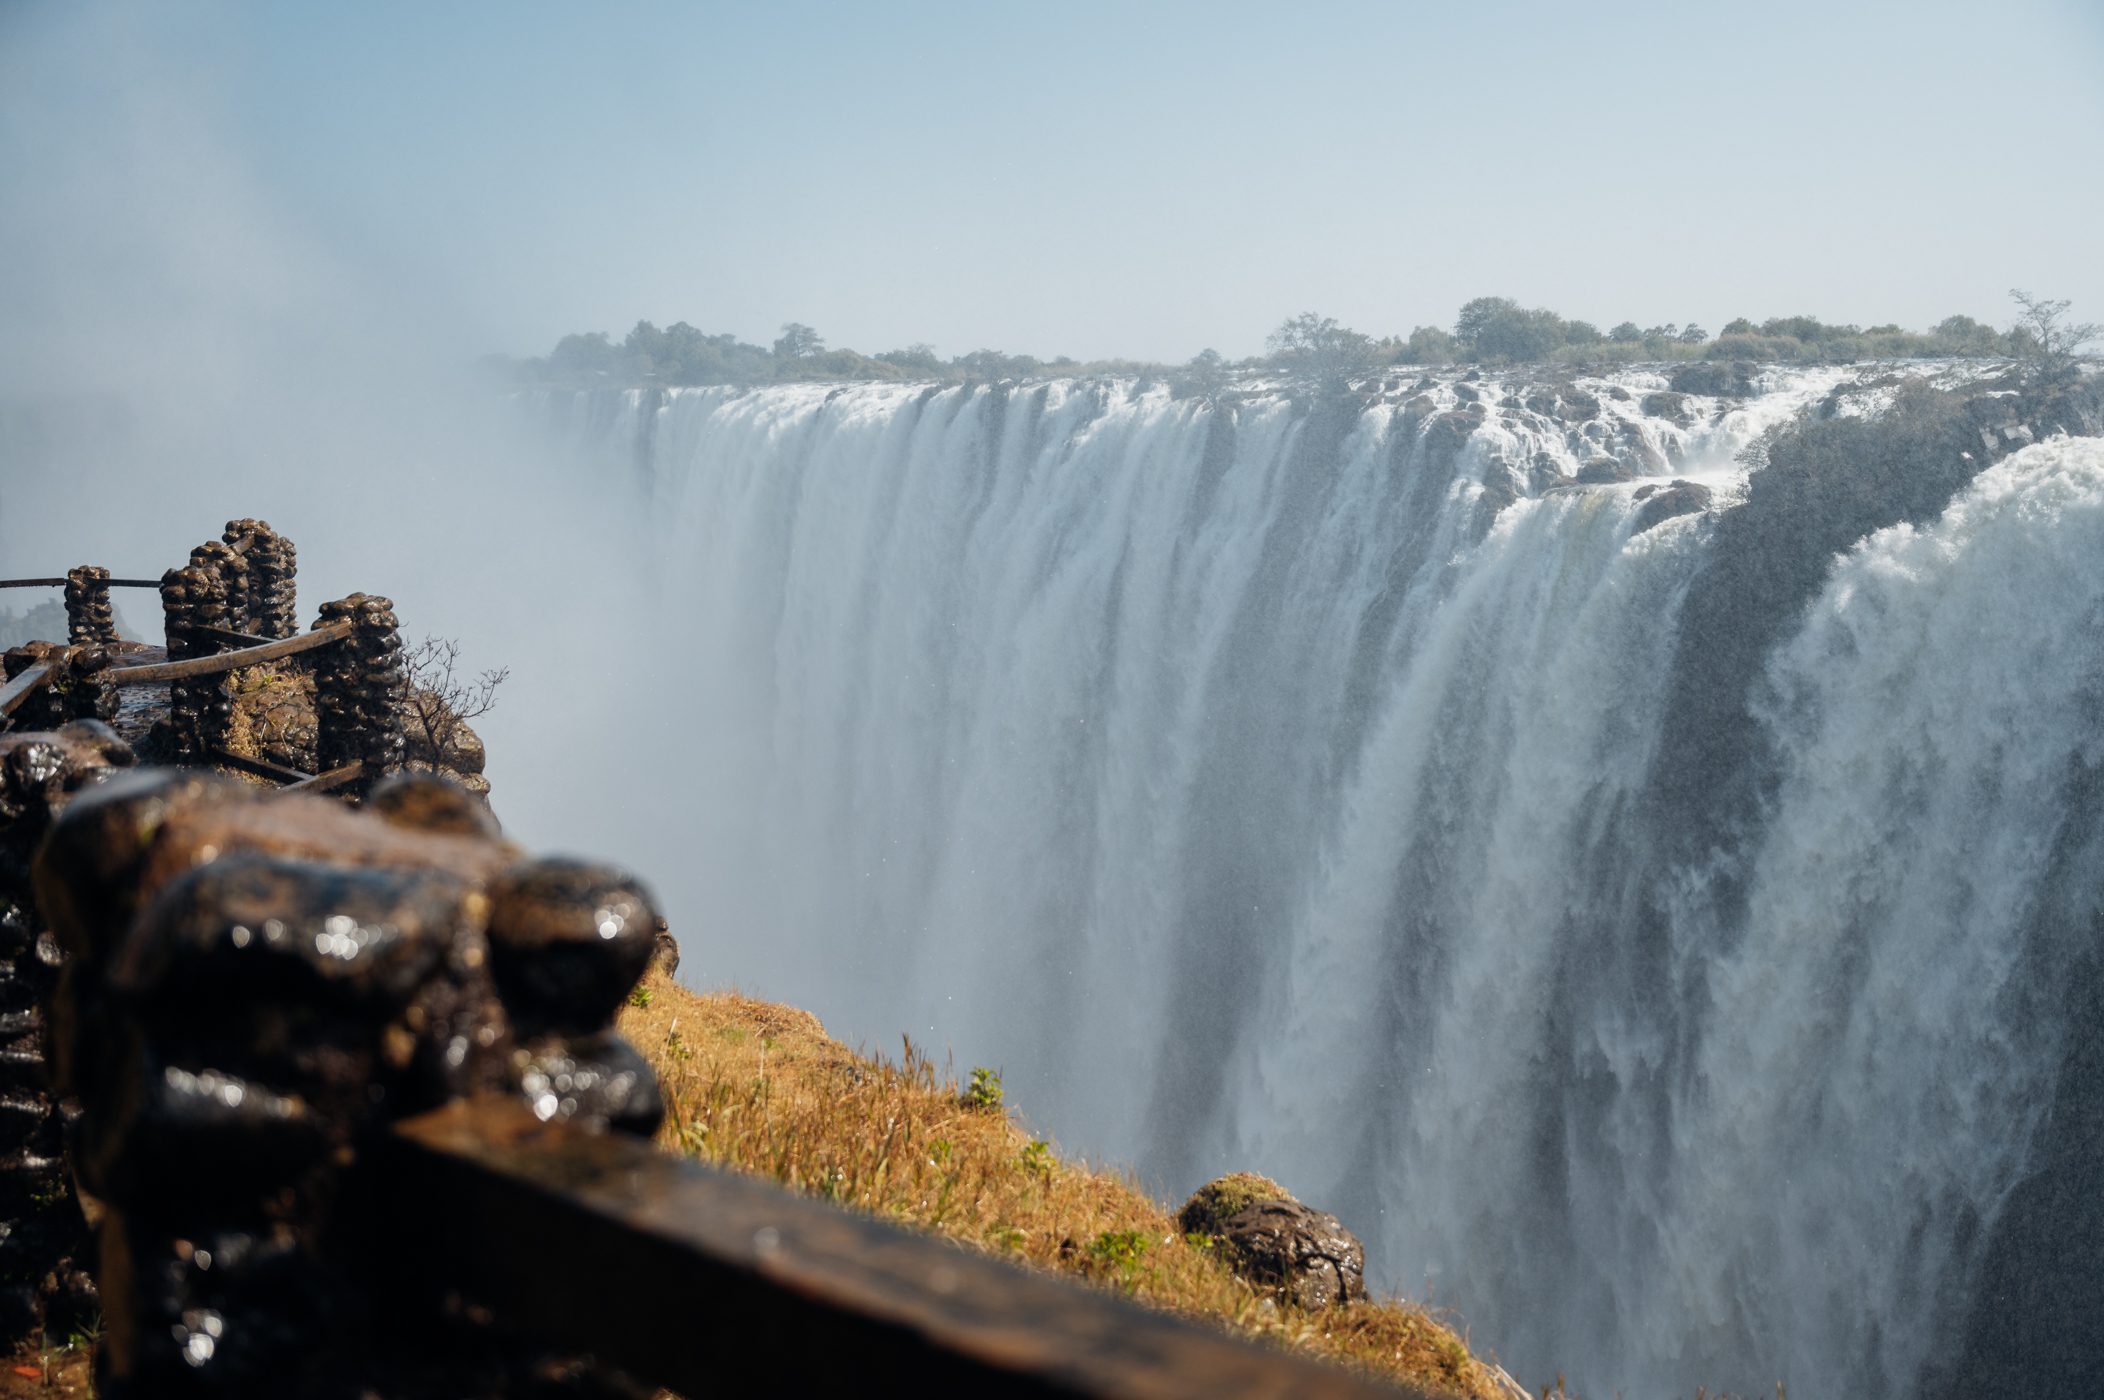 Victoria Falls as seen from the Zambian side